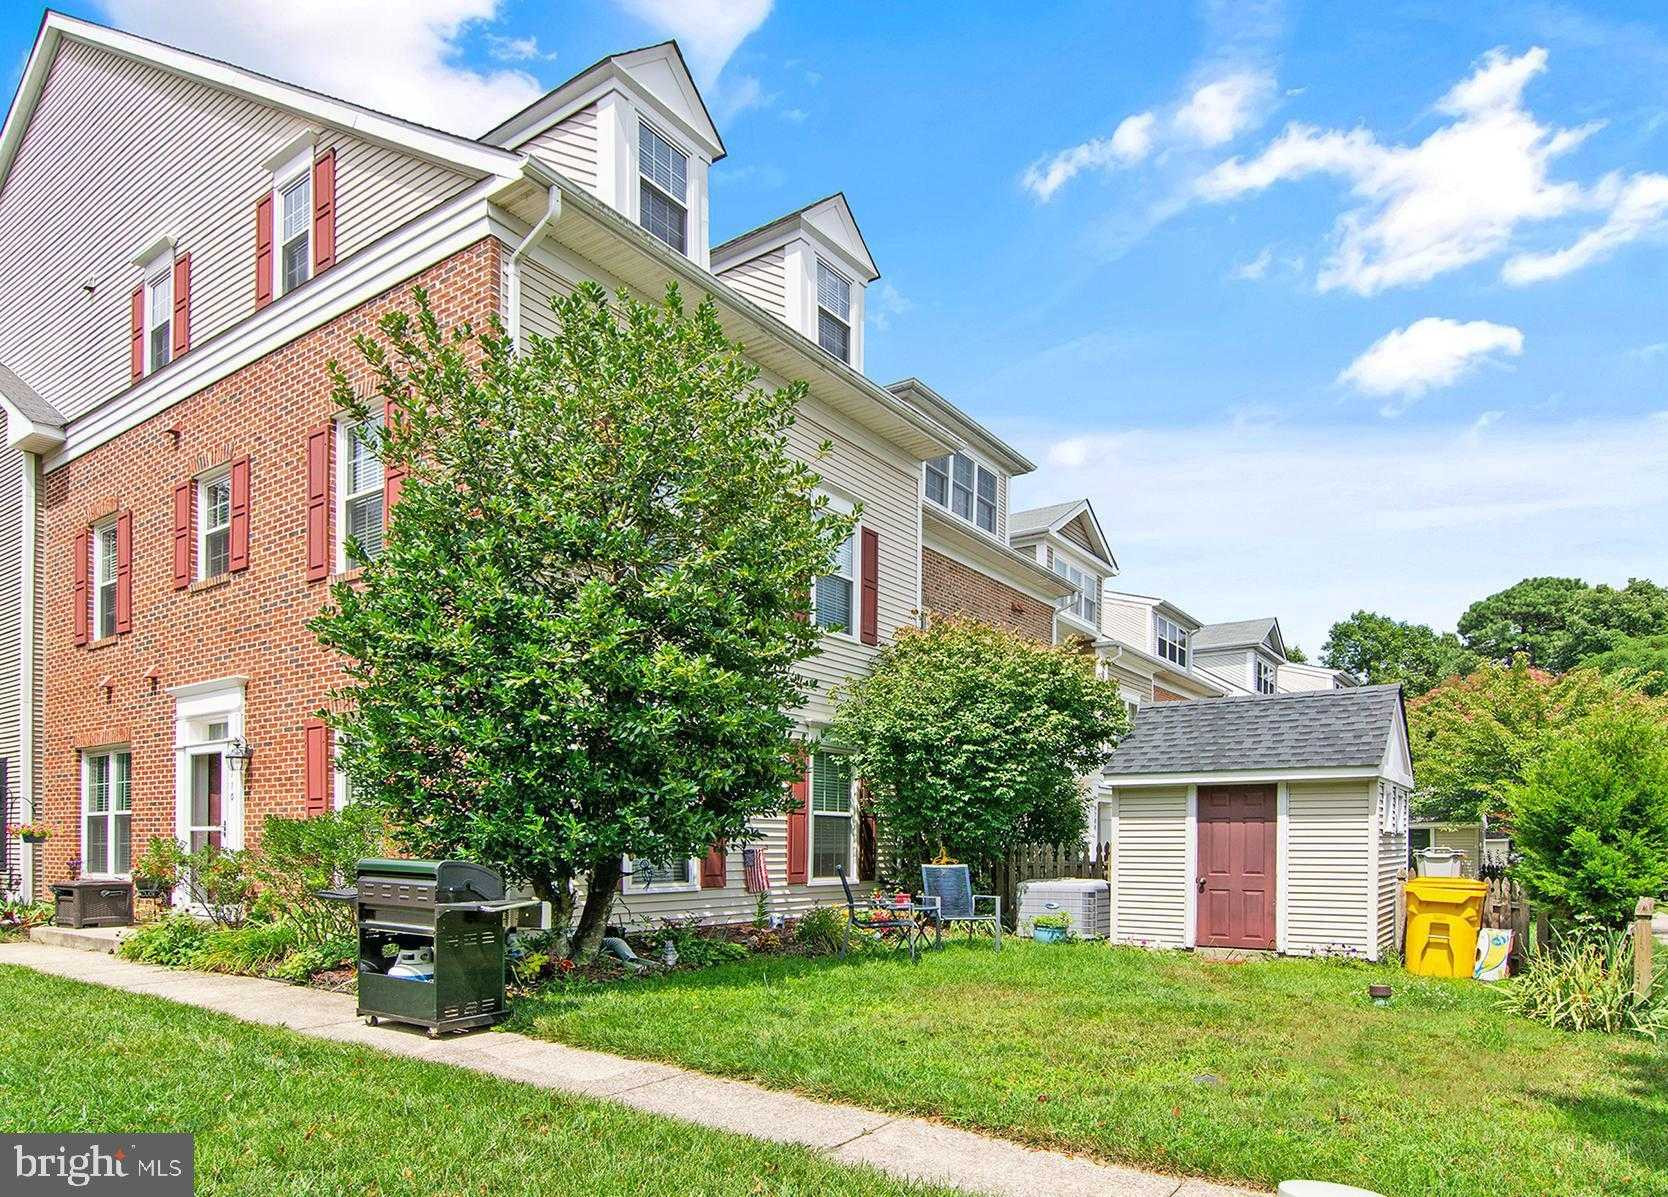 View ODENTON, MD 21113 townhome